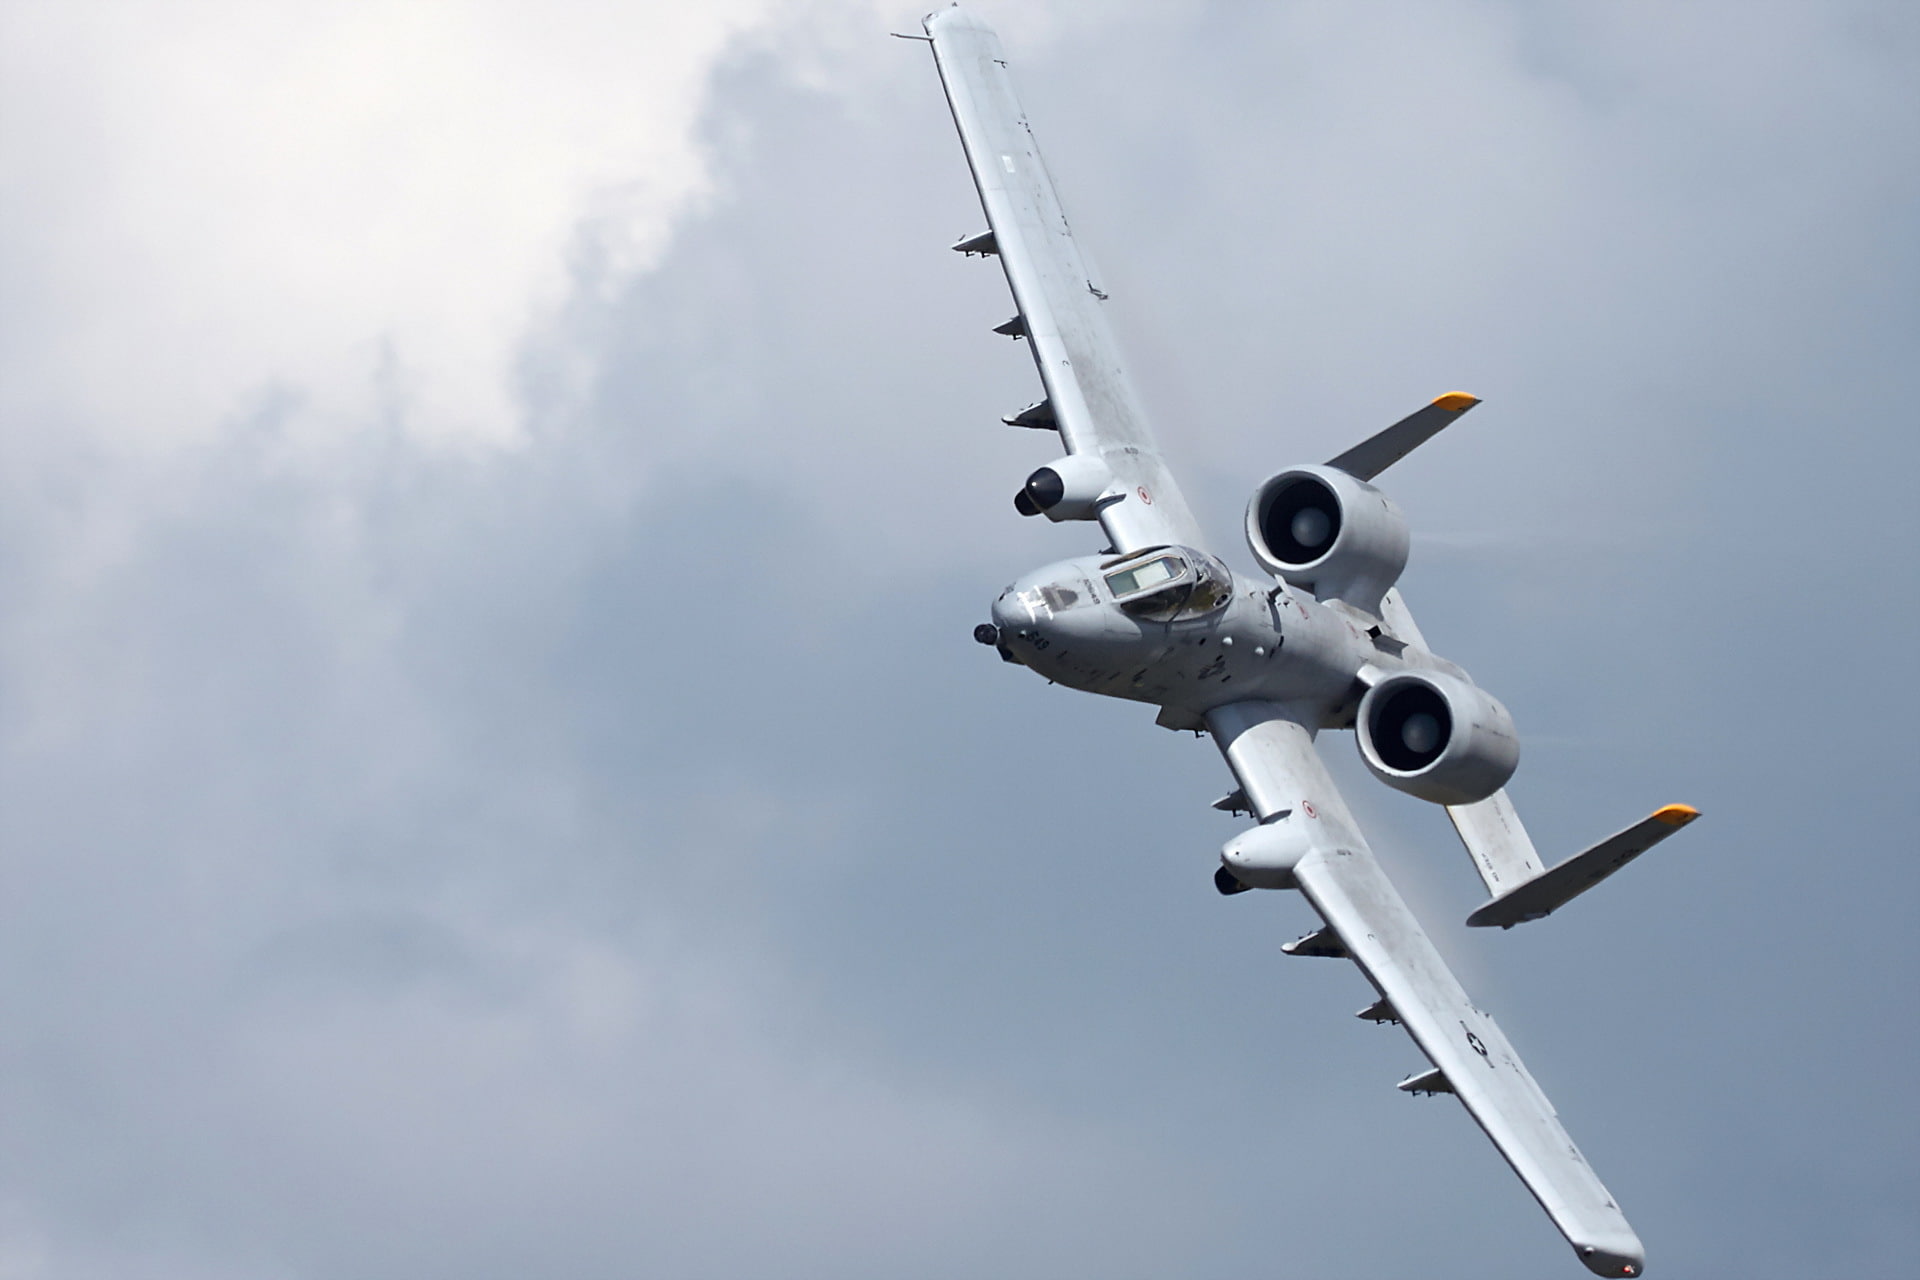 weapons, the plane, A10 Thunderbolt